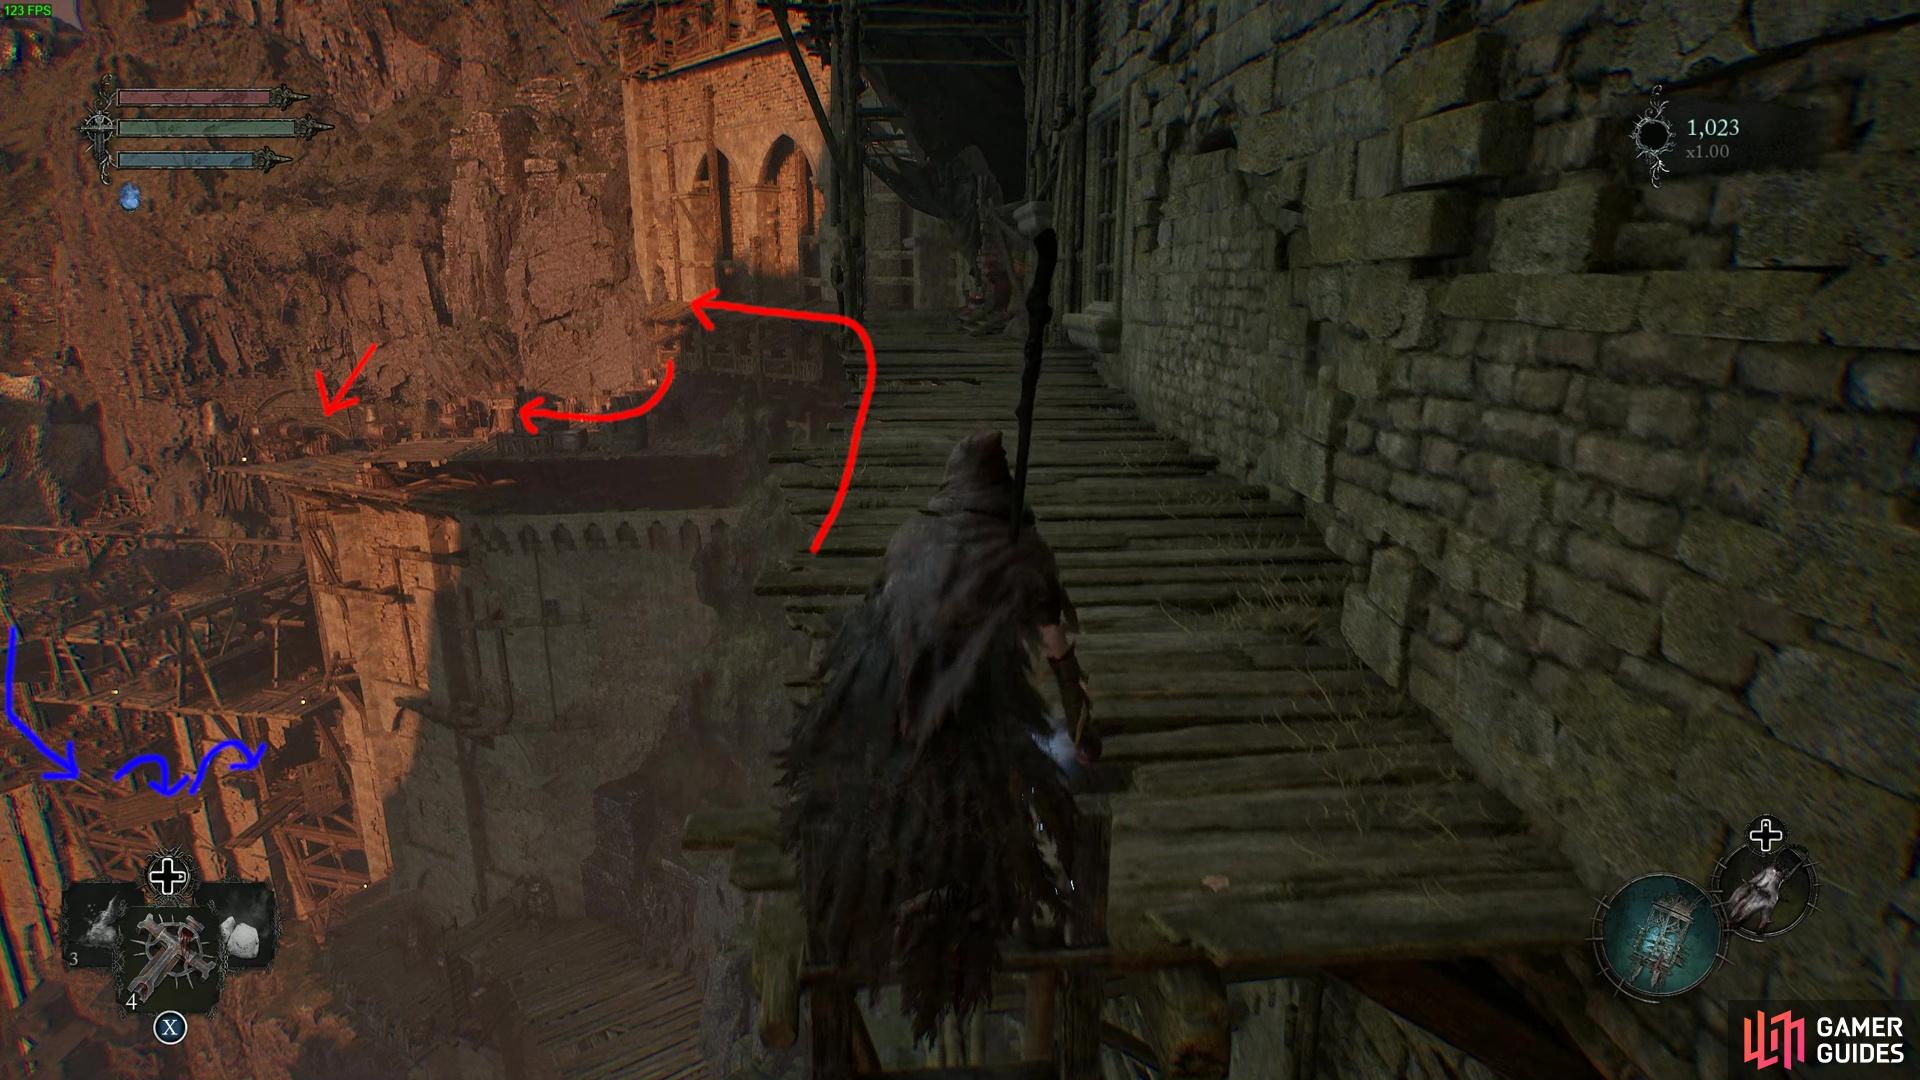 Follow the red path to make it to the Sanctuary Vestige. The blue takes you to a notable pathway which we discuss at the bottom of the Pilgrim’s Perch Walkthrough.